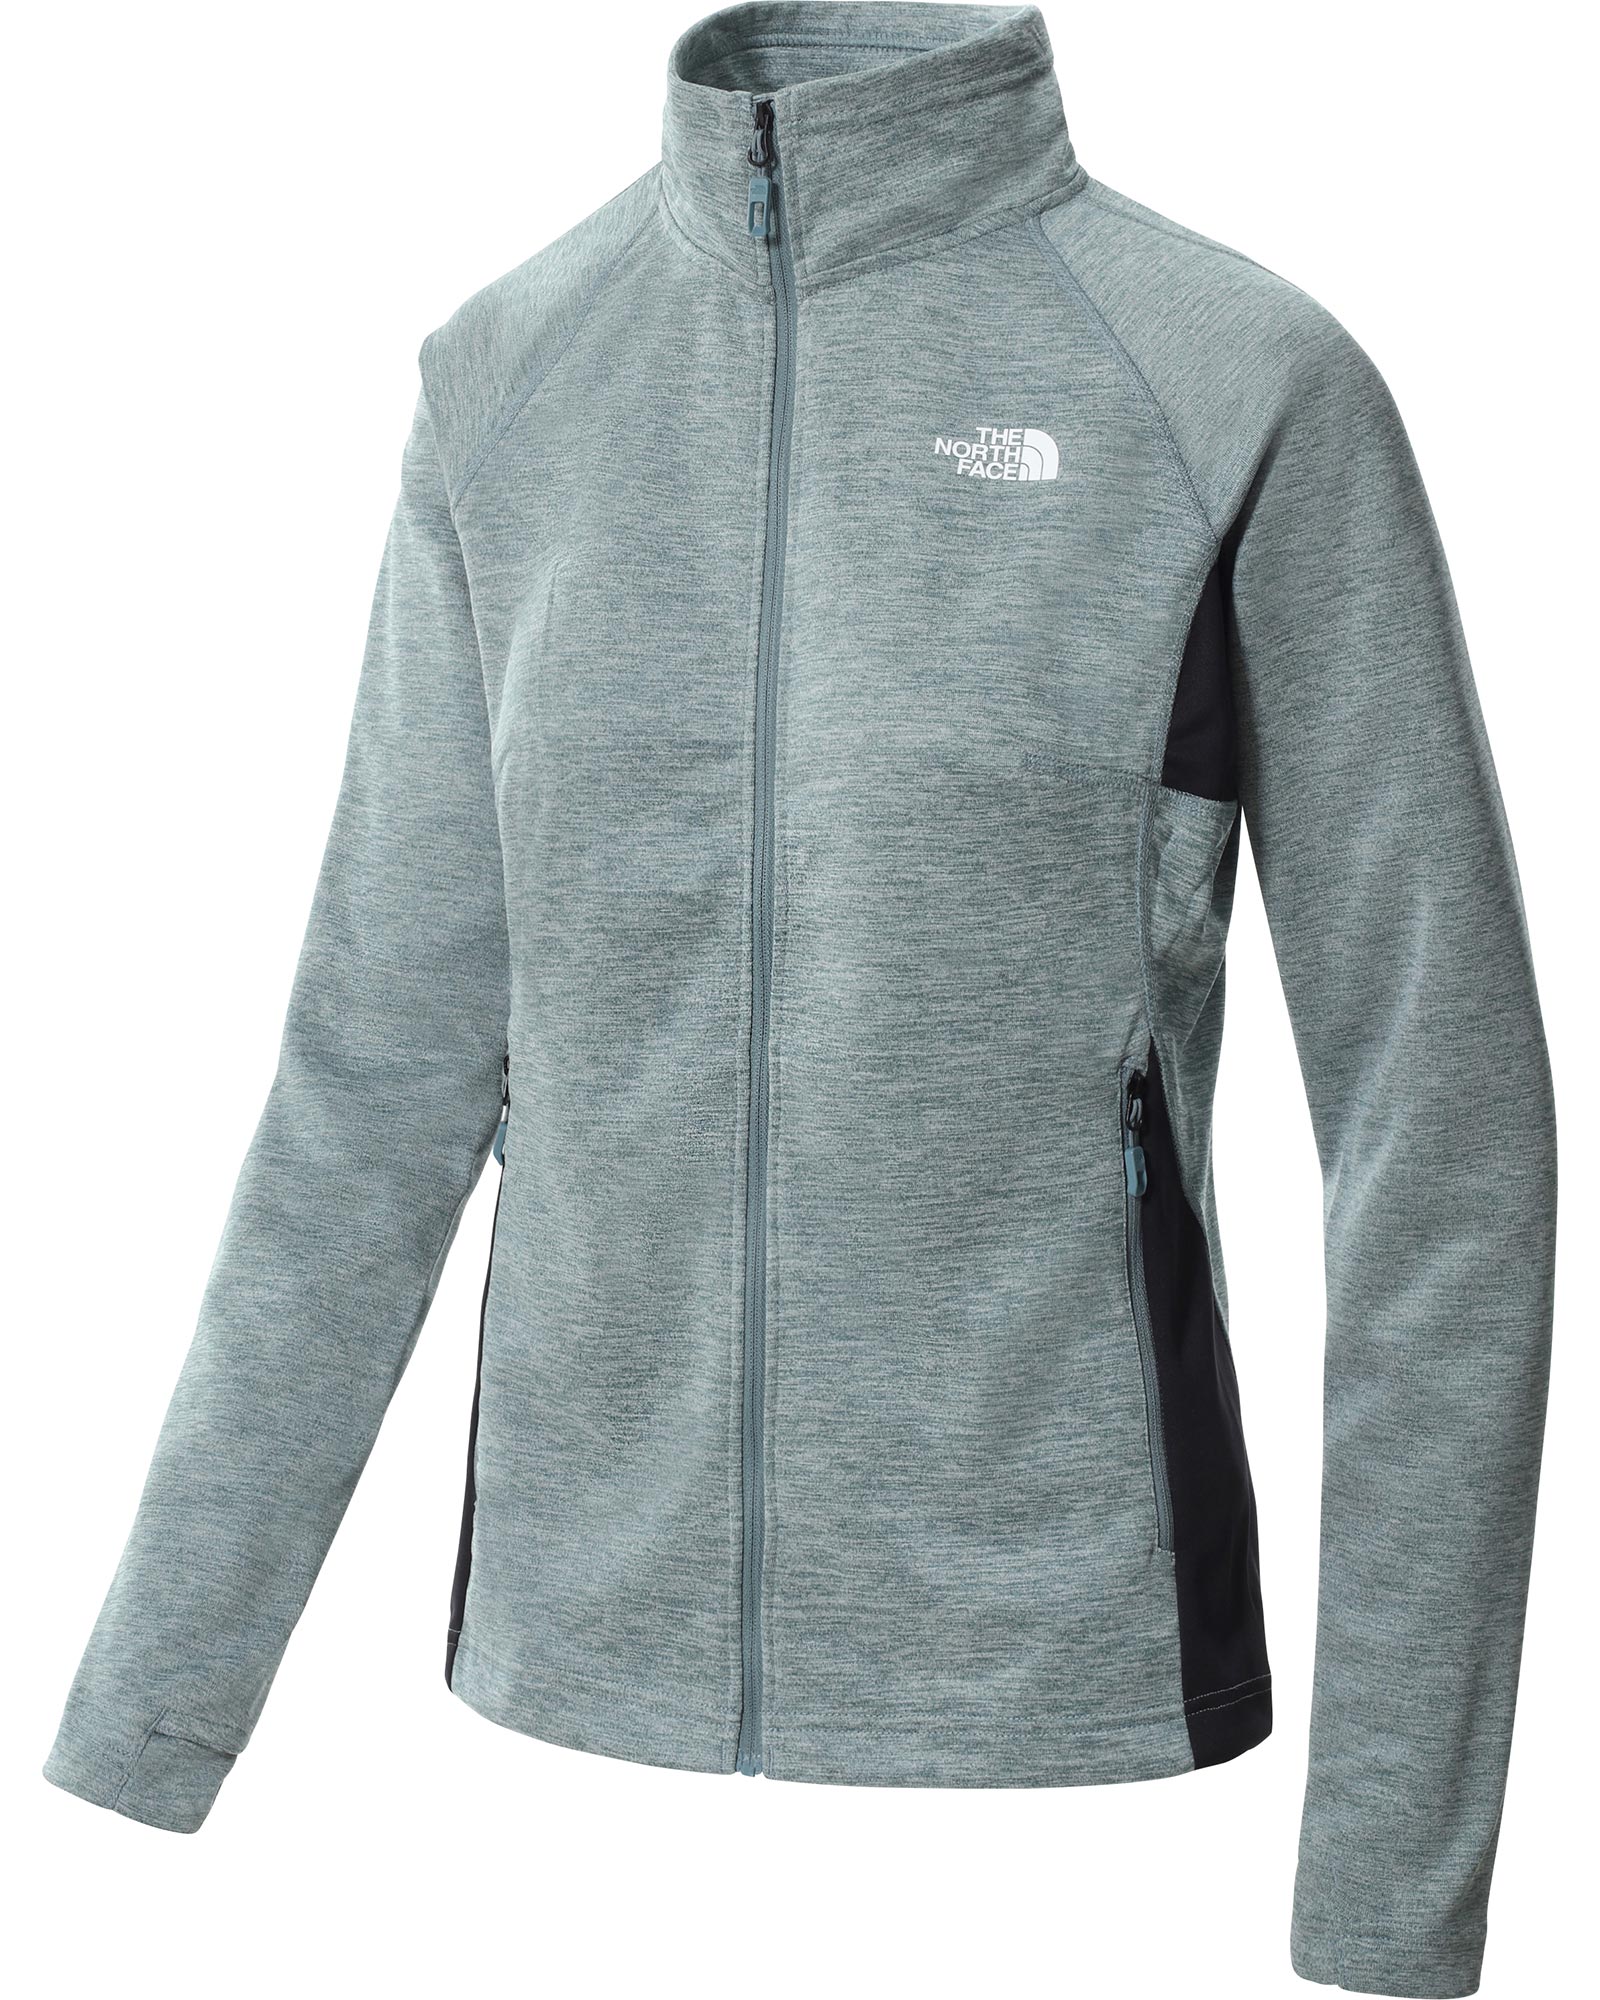 The North Face AO mid layer Women’s Full Zip Jacket - Goblin Blue XS